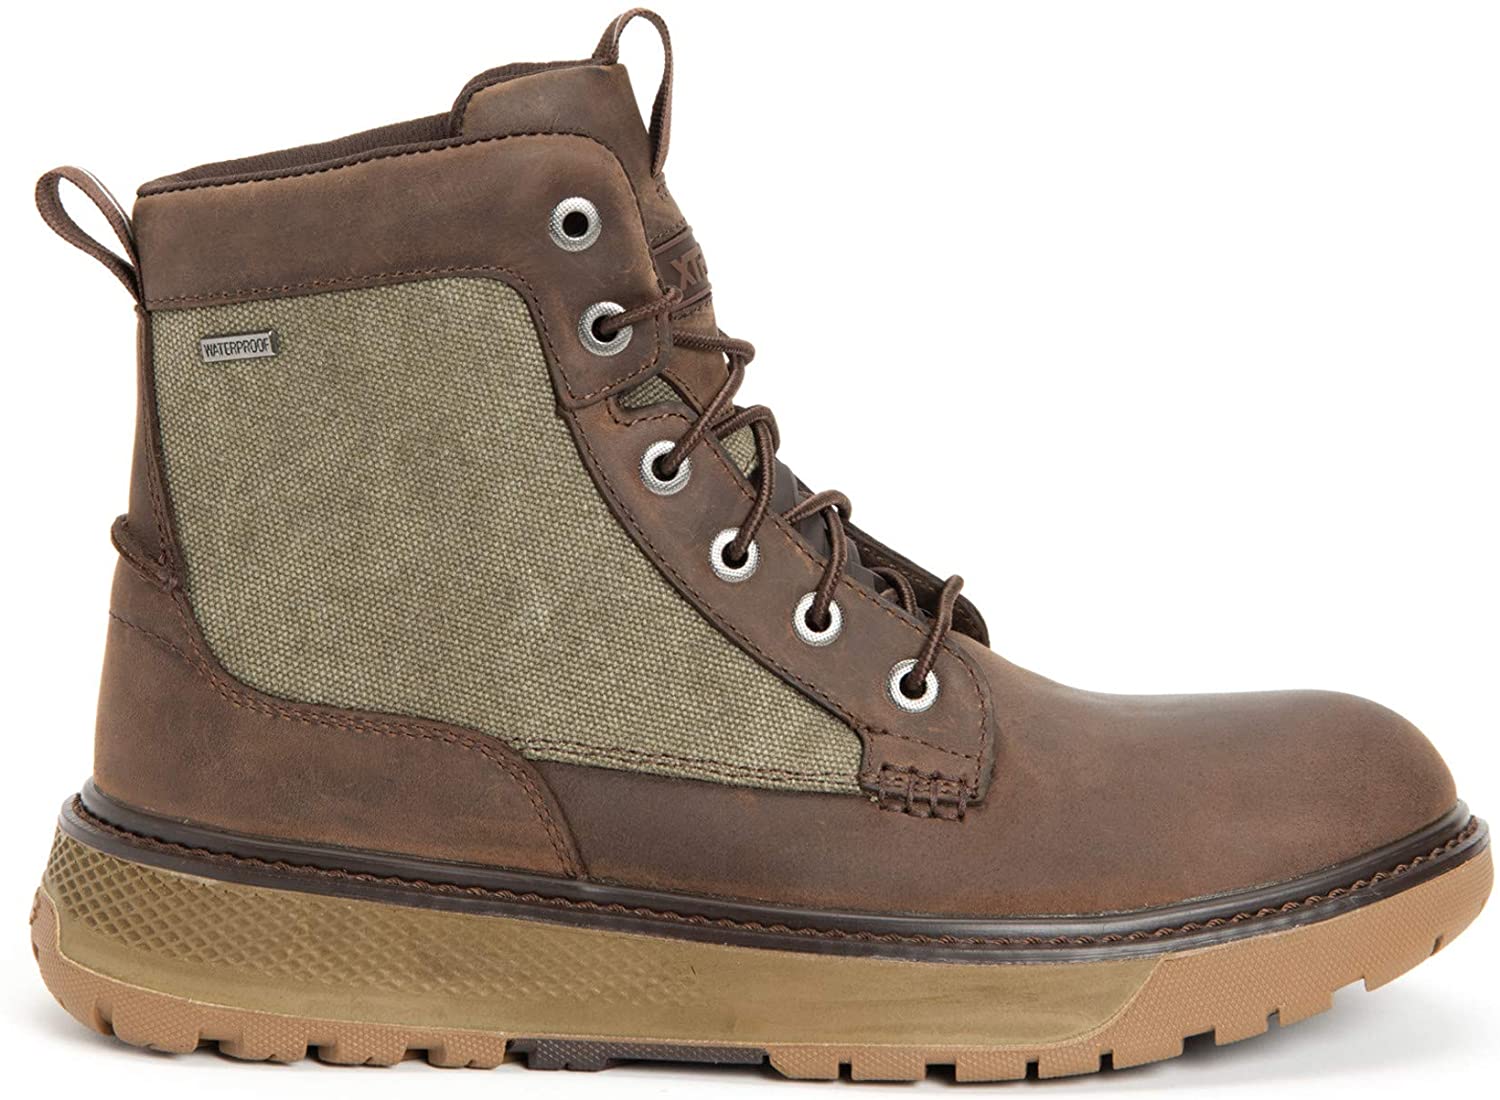 Men's Xtratuf Bristol Bay Work Boot in Brown/Green from the side